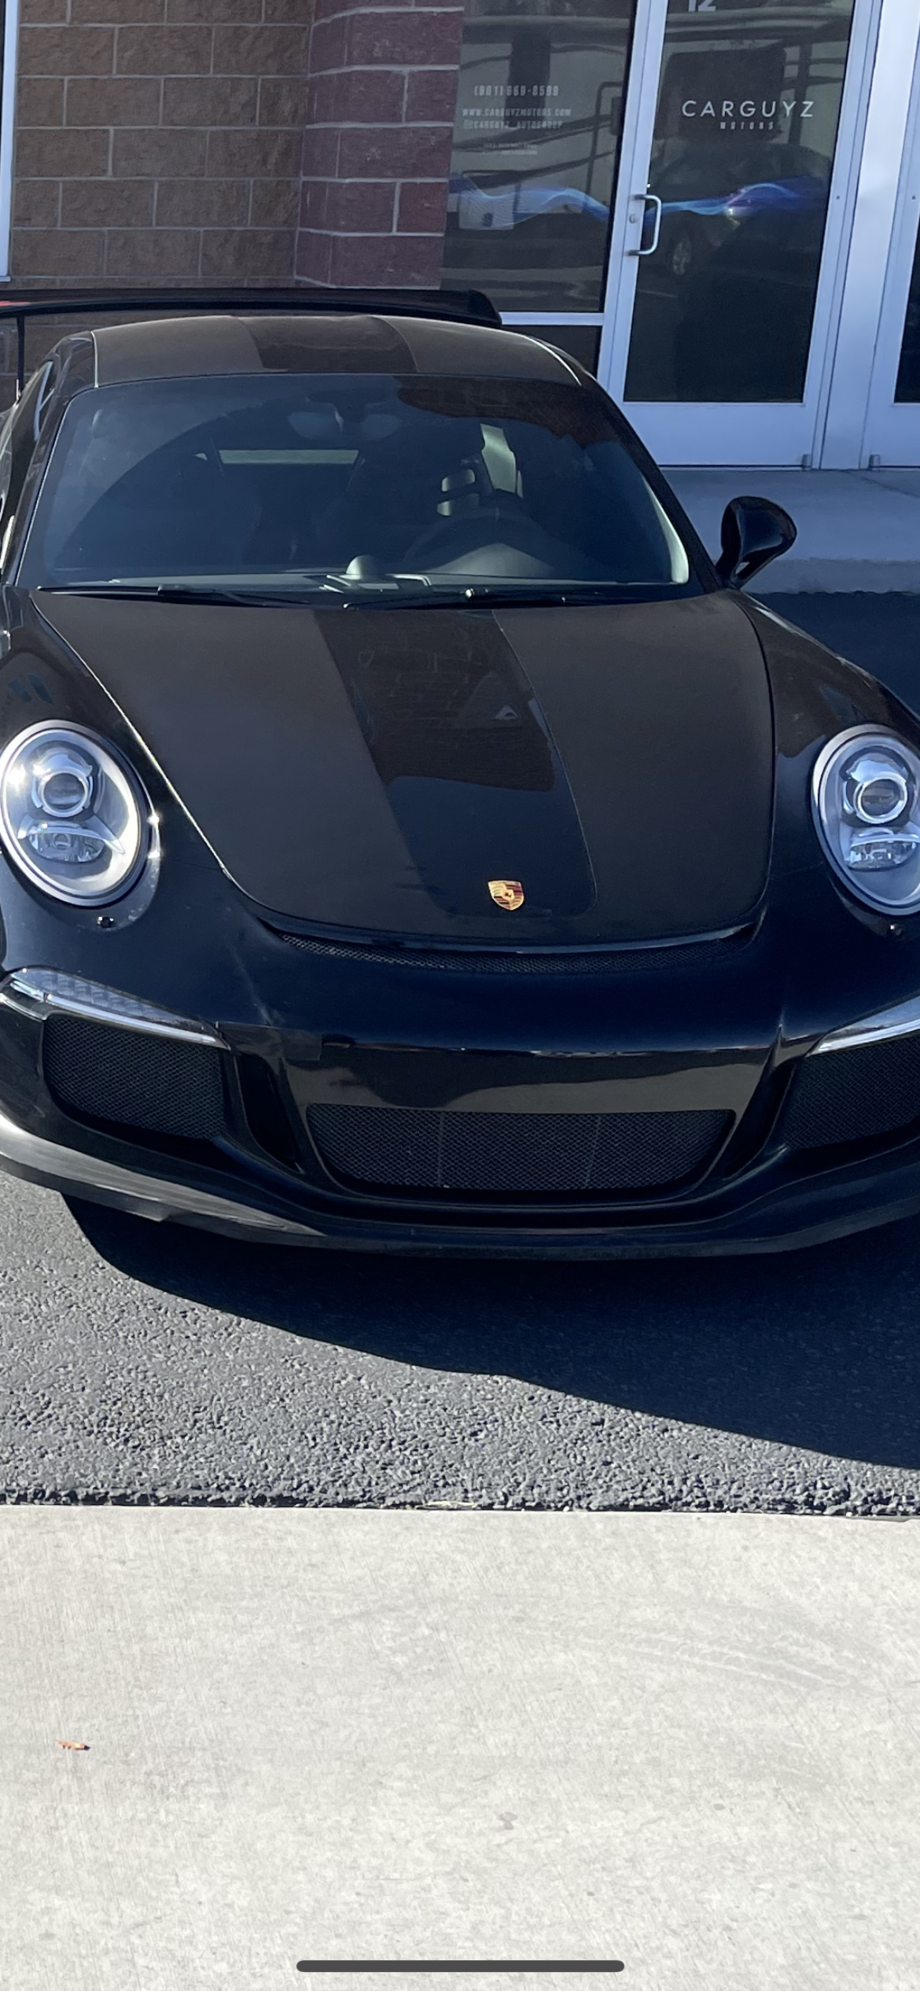 Exterior Body Parts - 991.1 Gt3rs OEM carbon hood - Used - 2014 to 2017 Porsche 911 - Orem, UT 84059, United States